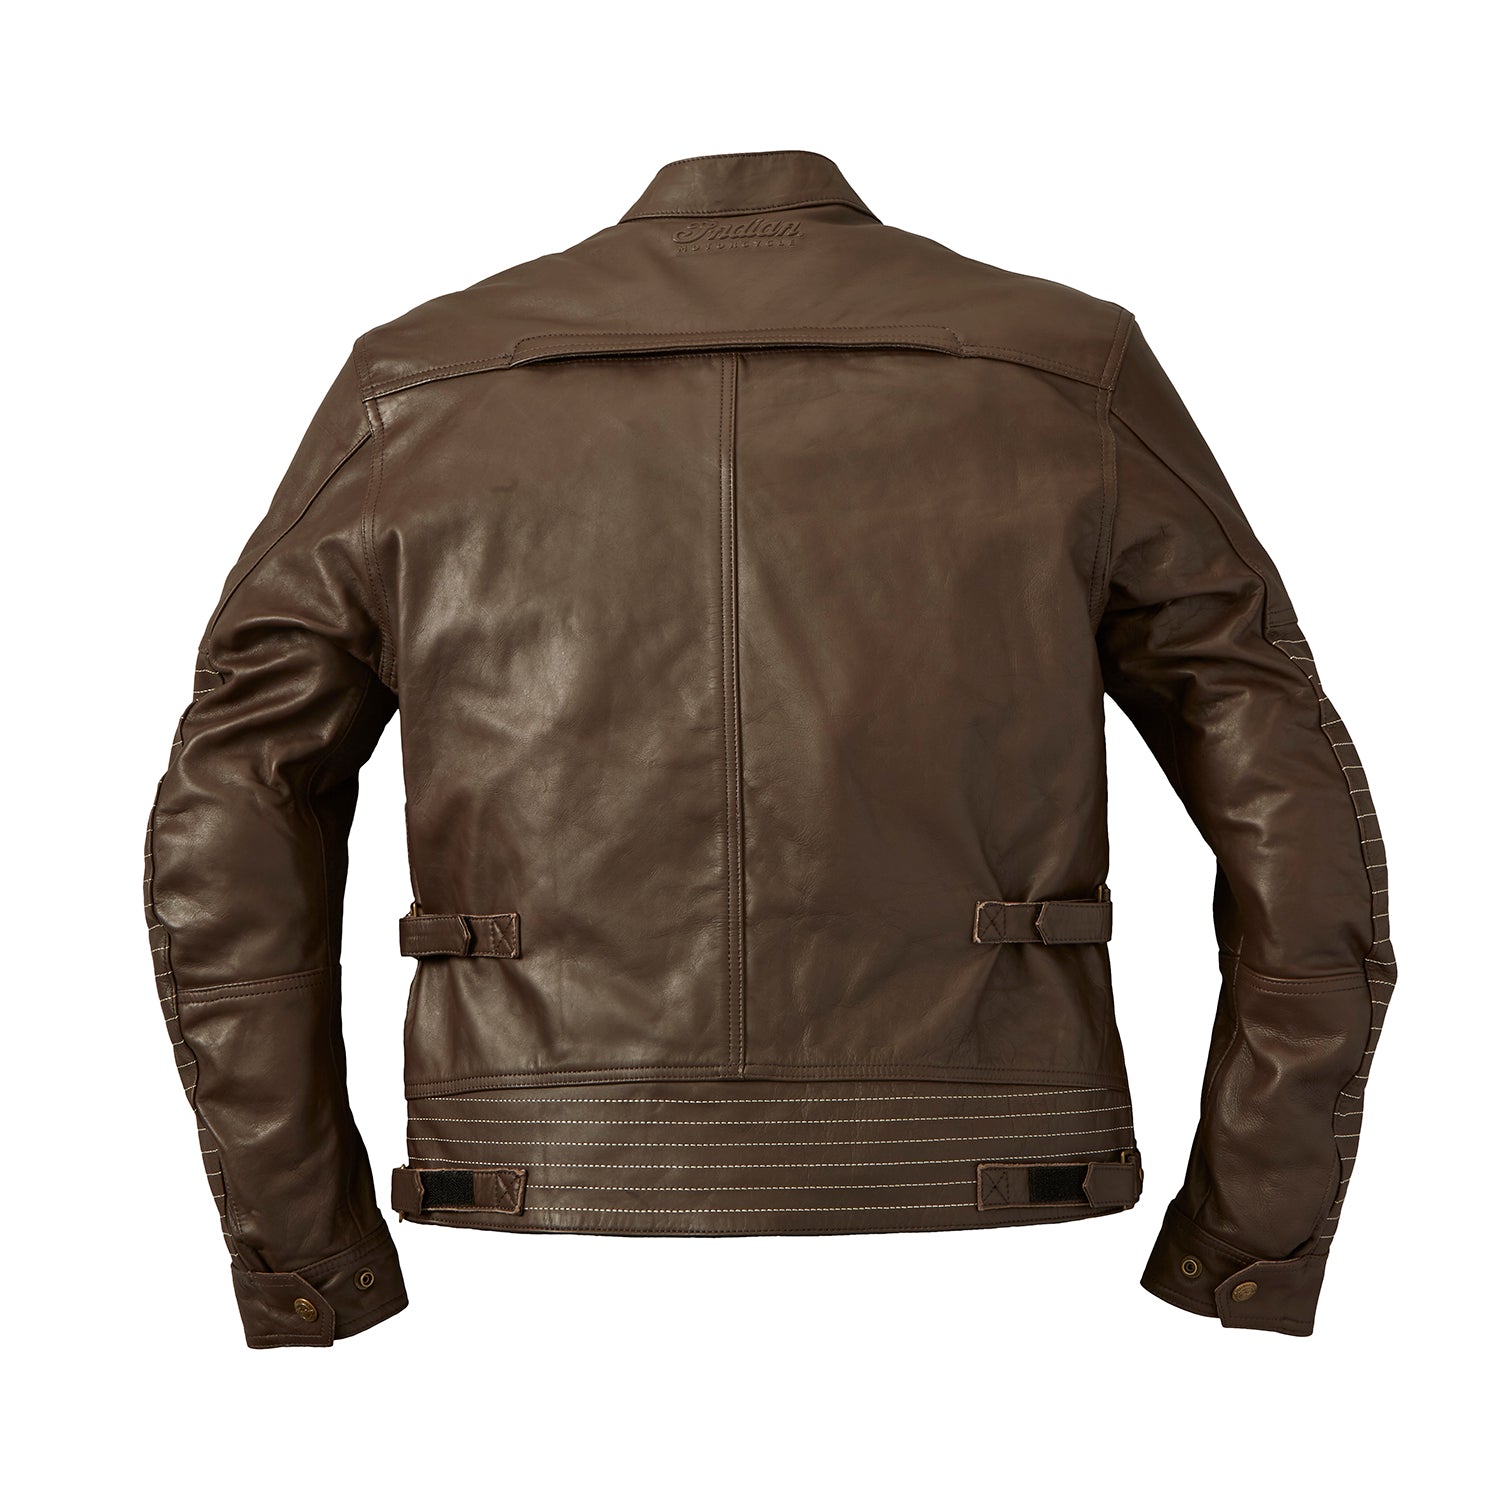 Men's Leather Phoenix Riding Jacket with Removable Lining, Brown